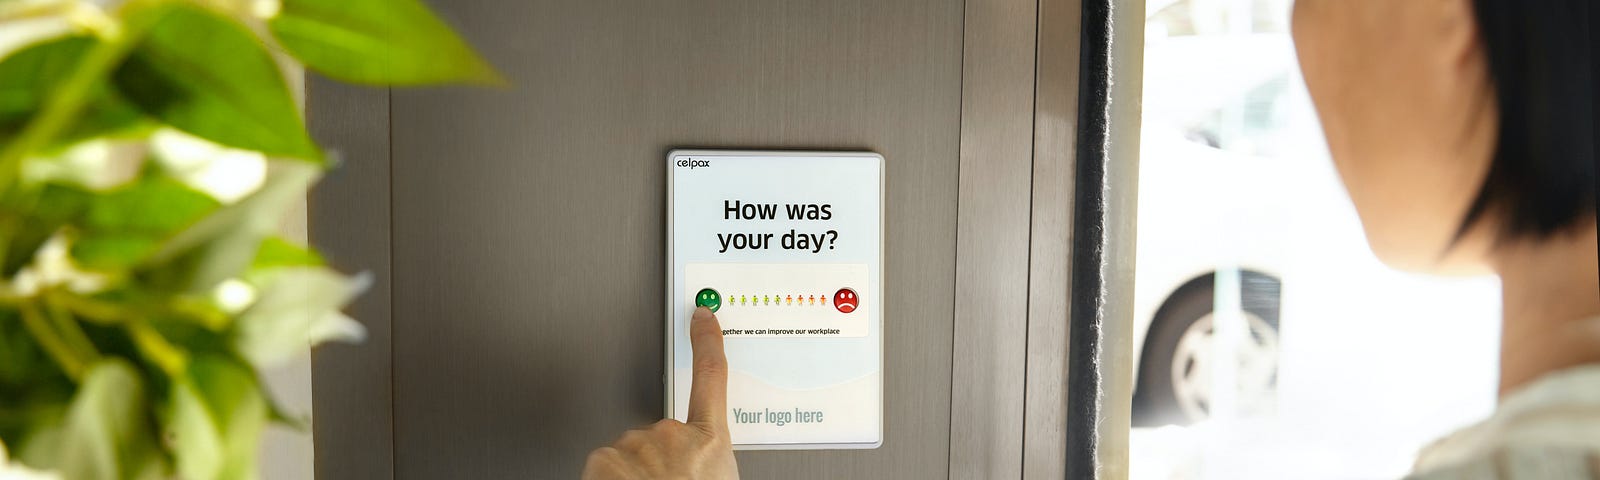 A woman rating her day on a mobile device